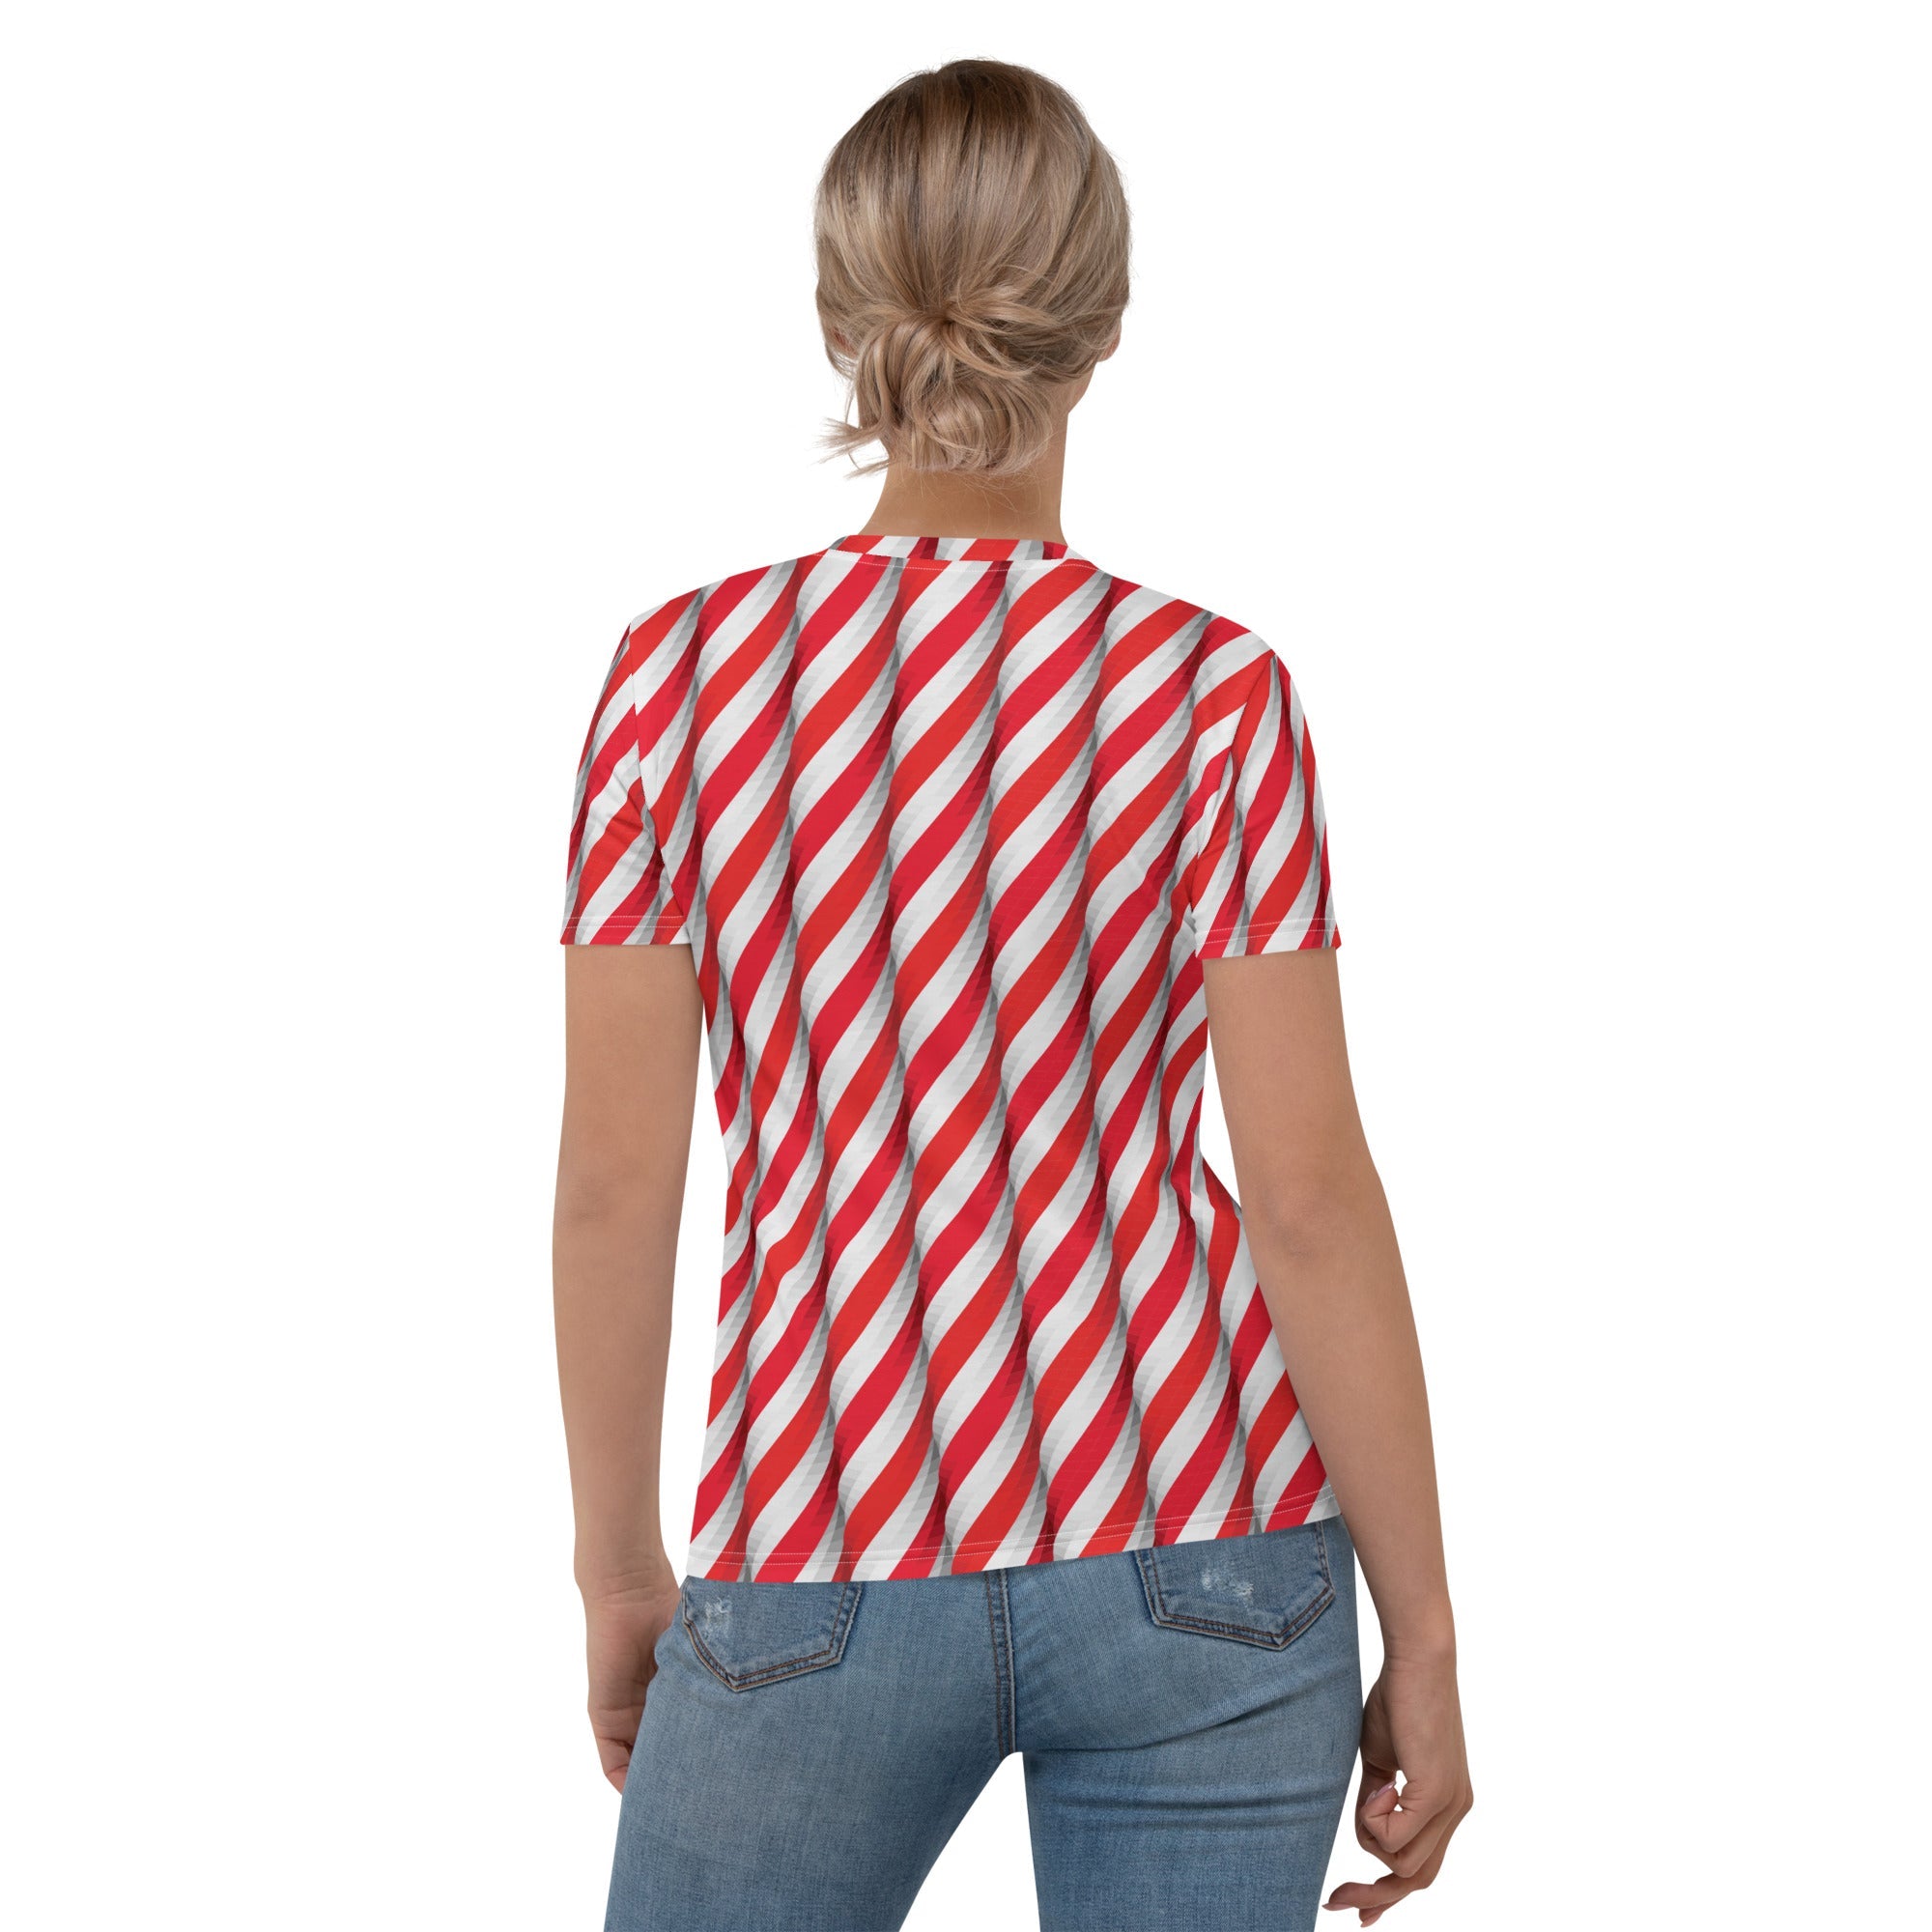 Real Candy Cane T-shirt